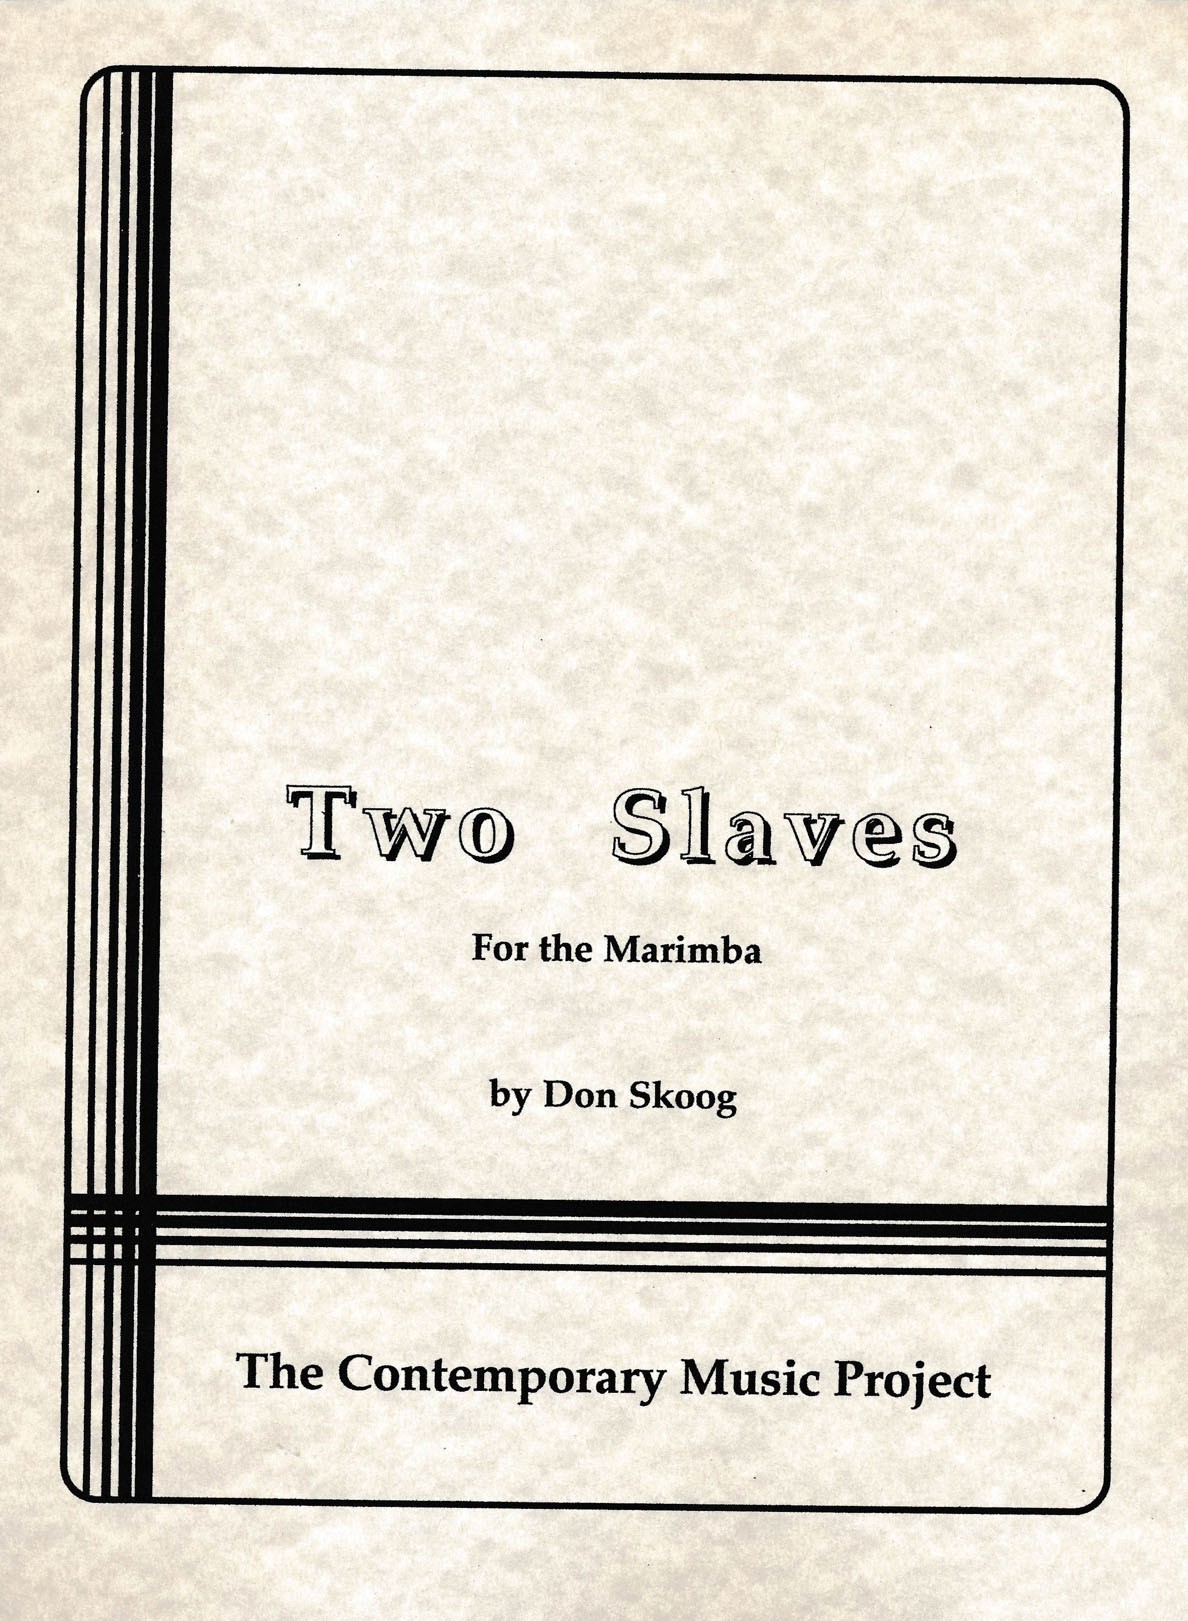 Two Slaves by Donald Skoog